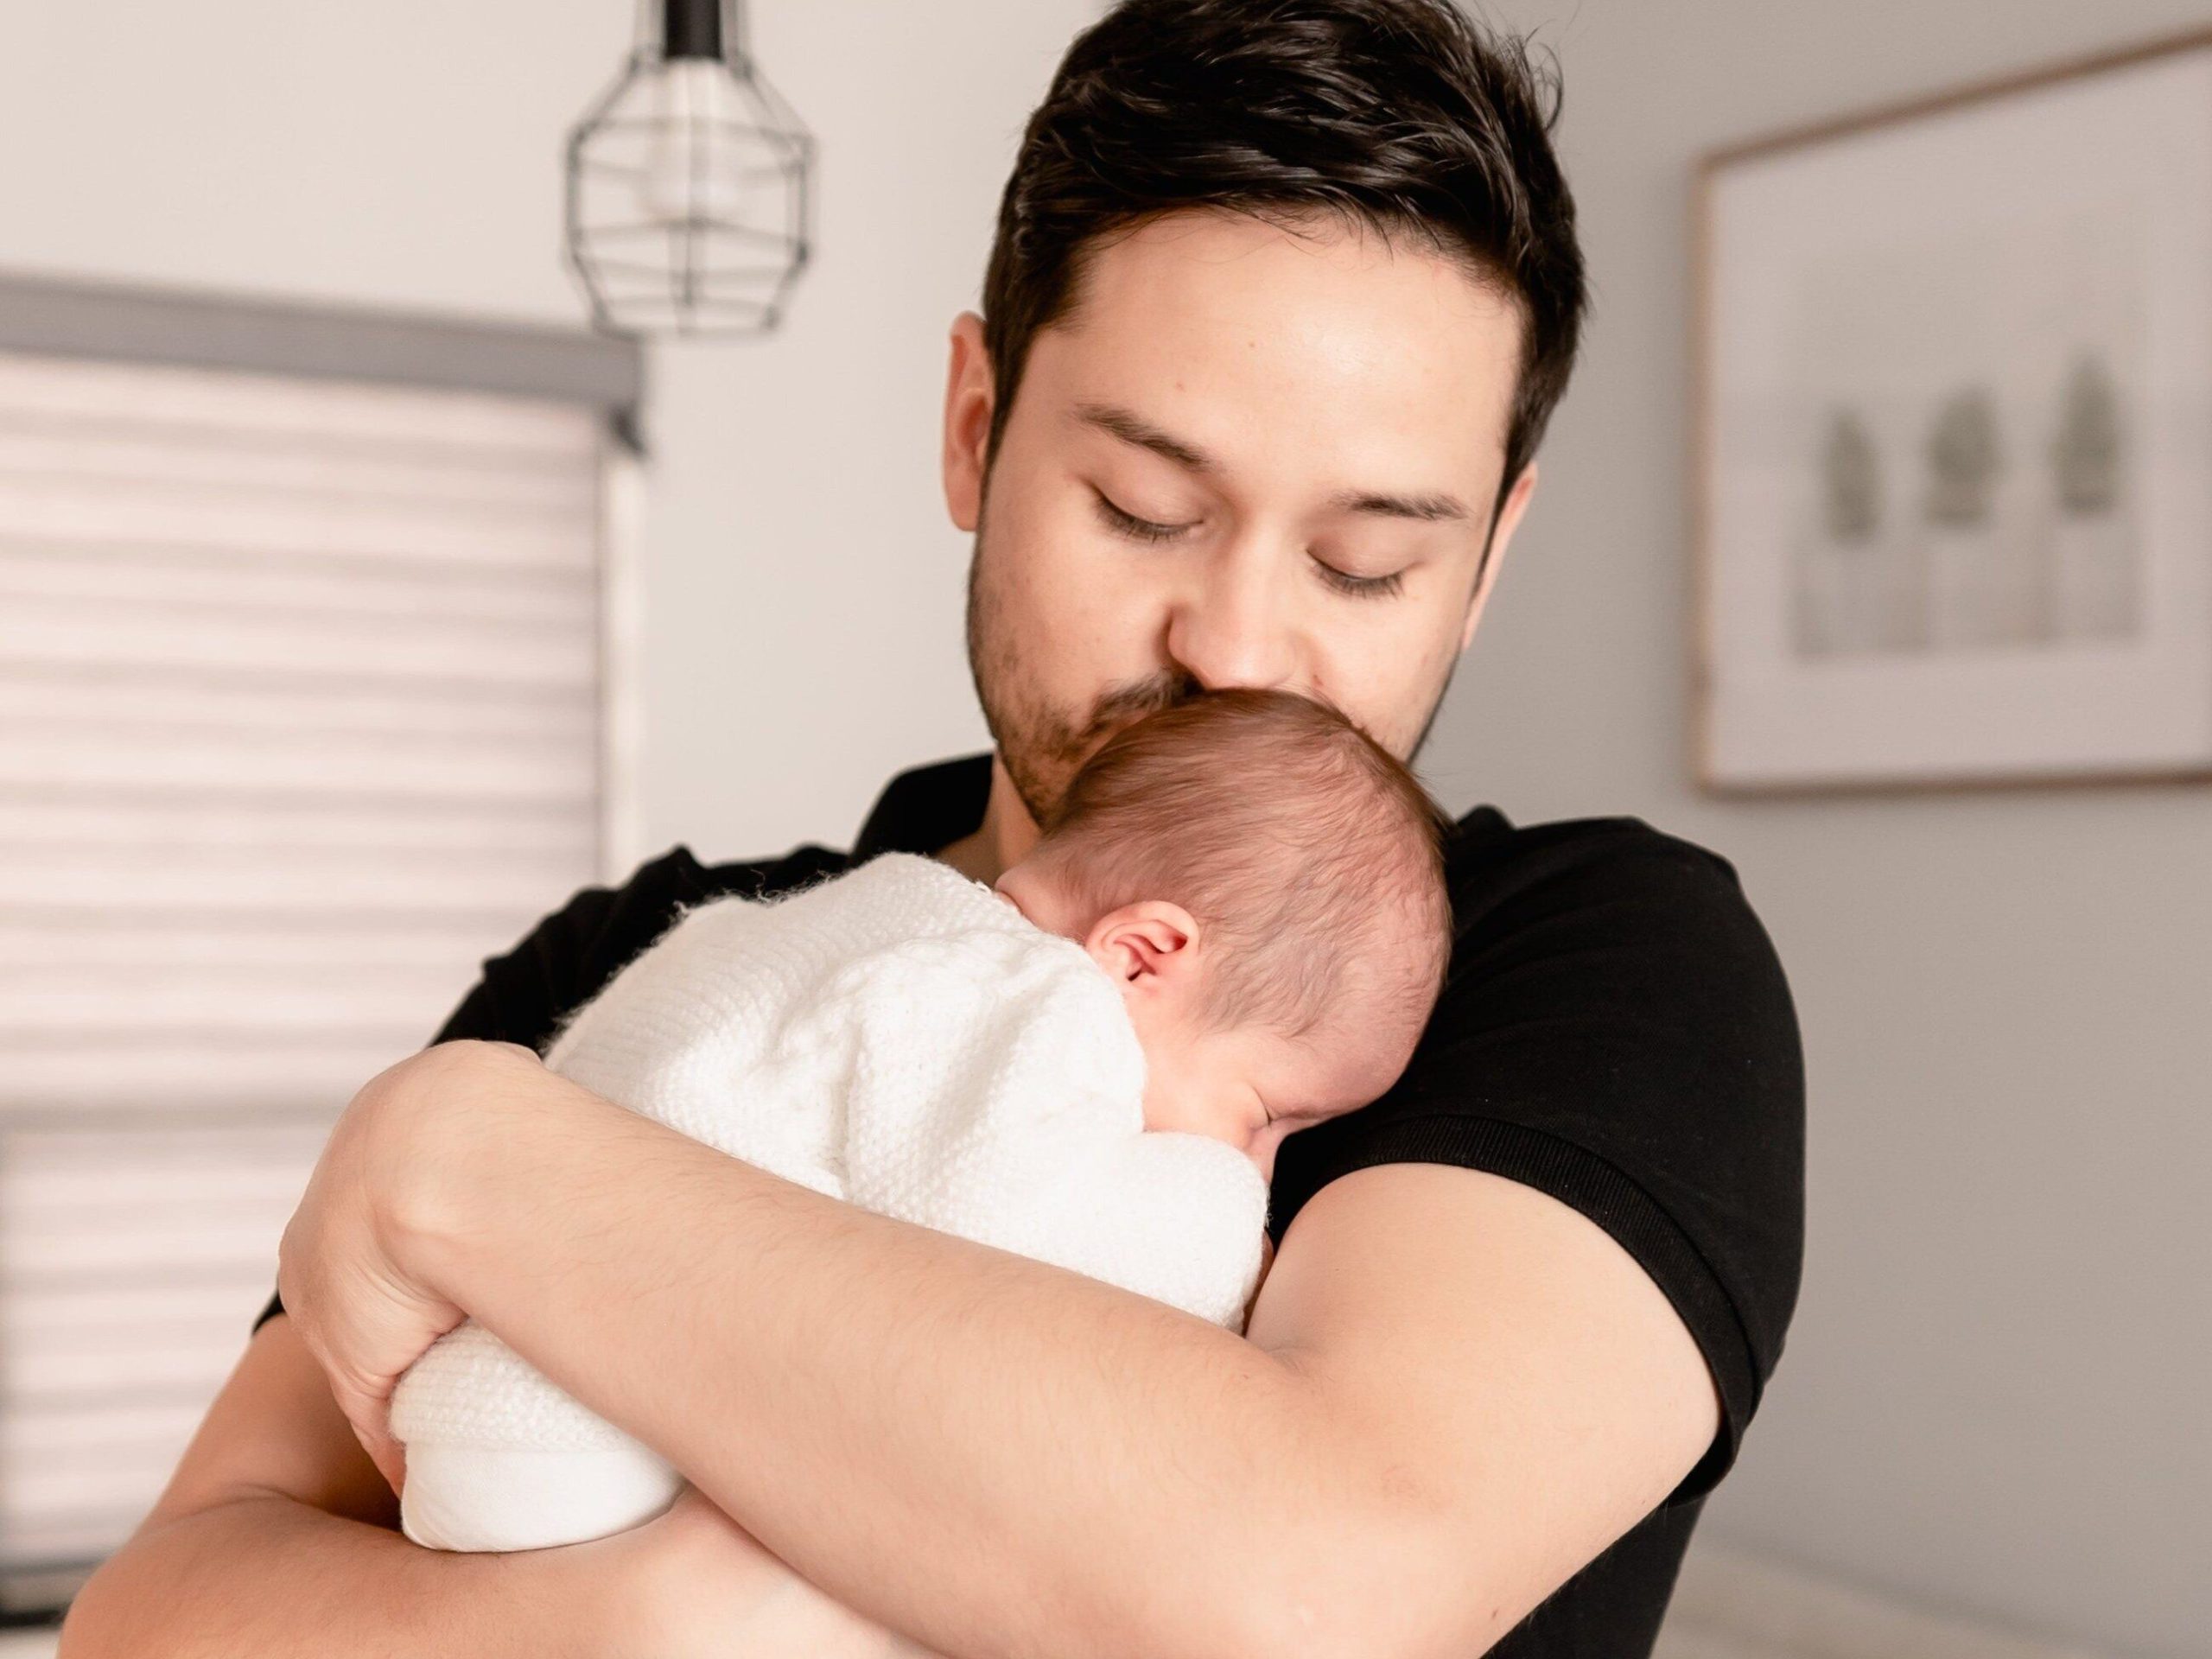 Does postpartum depression also affect men?  This is a very talked about topic